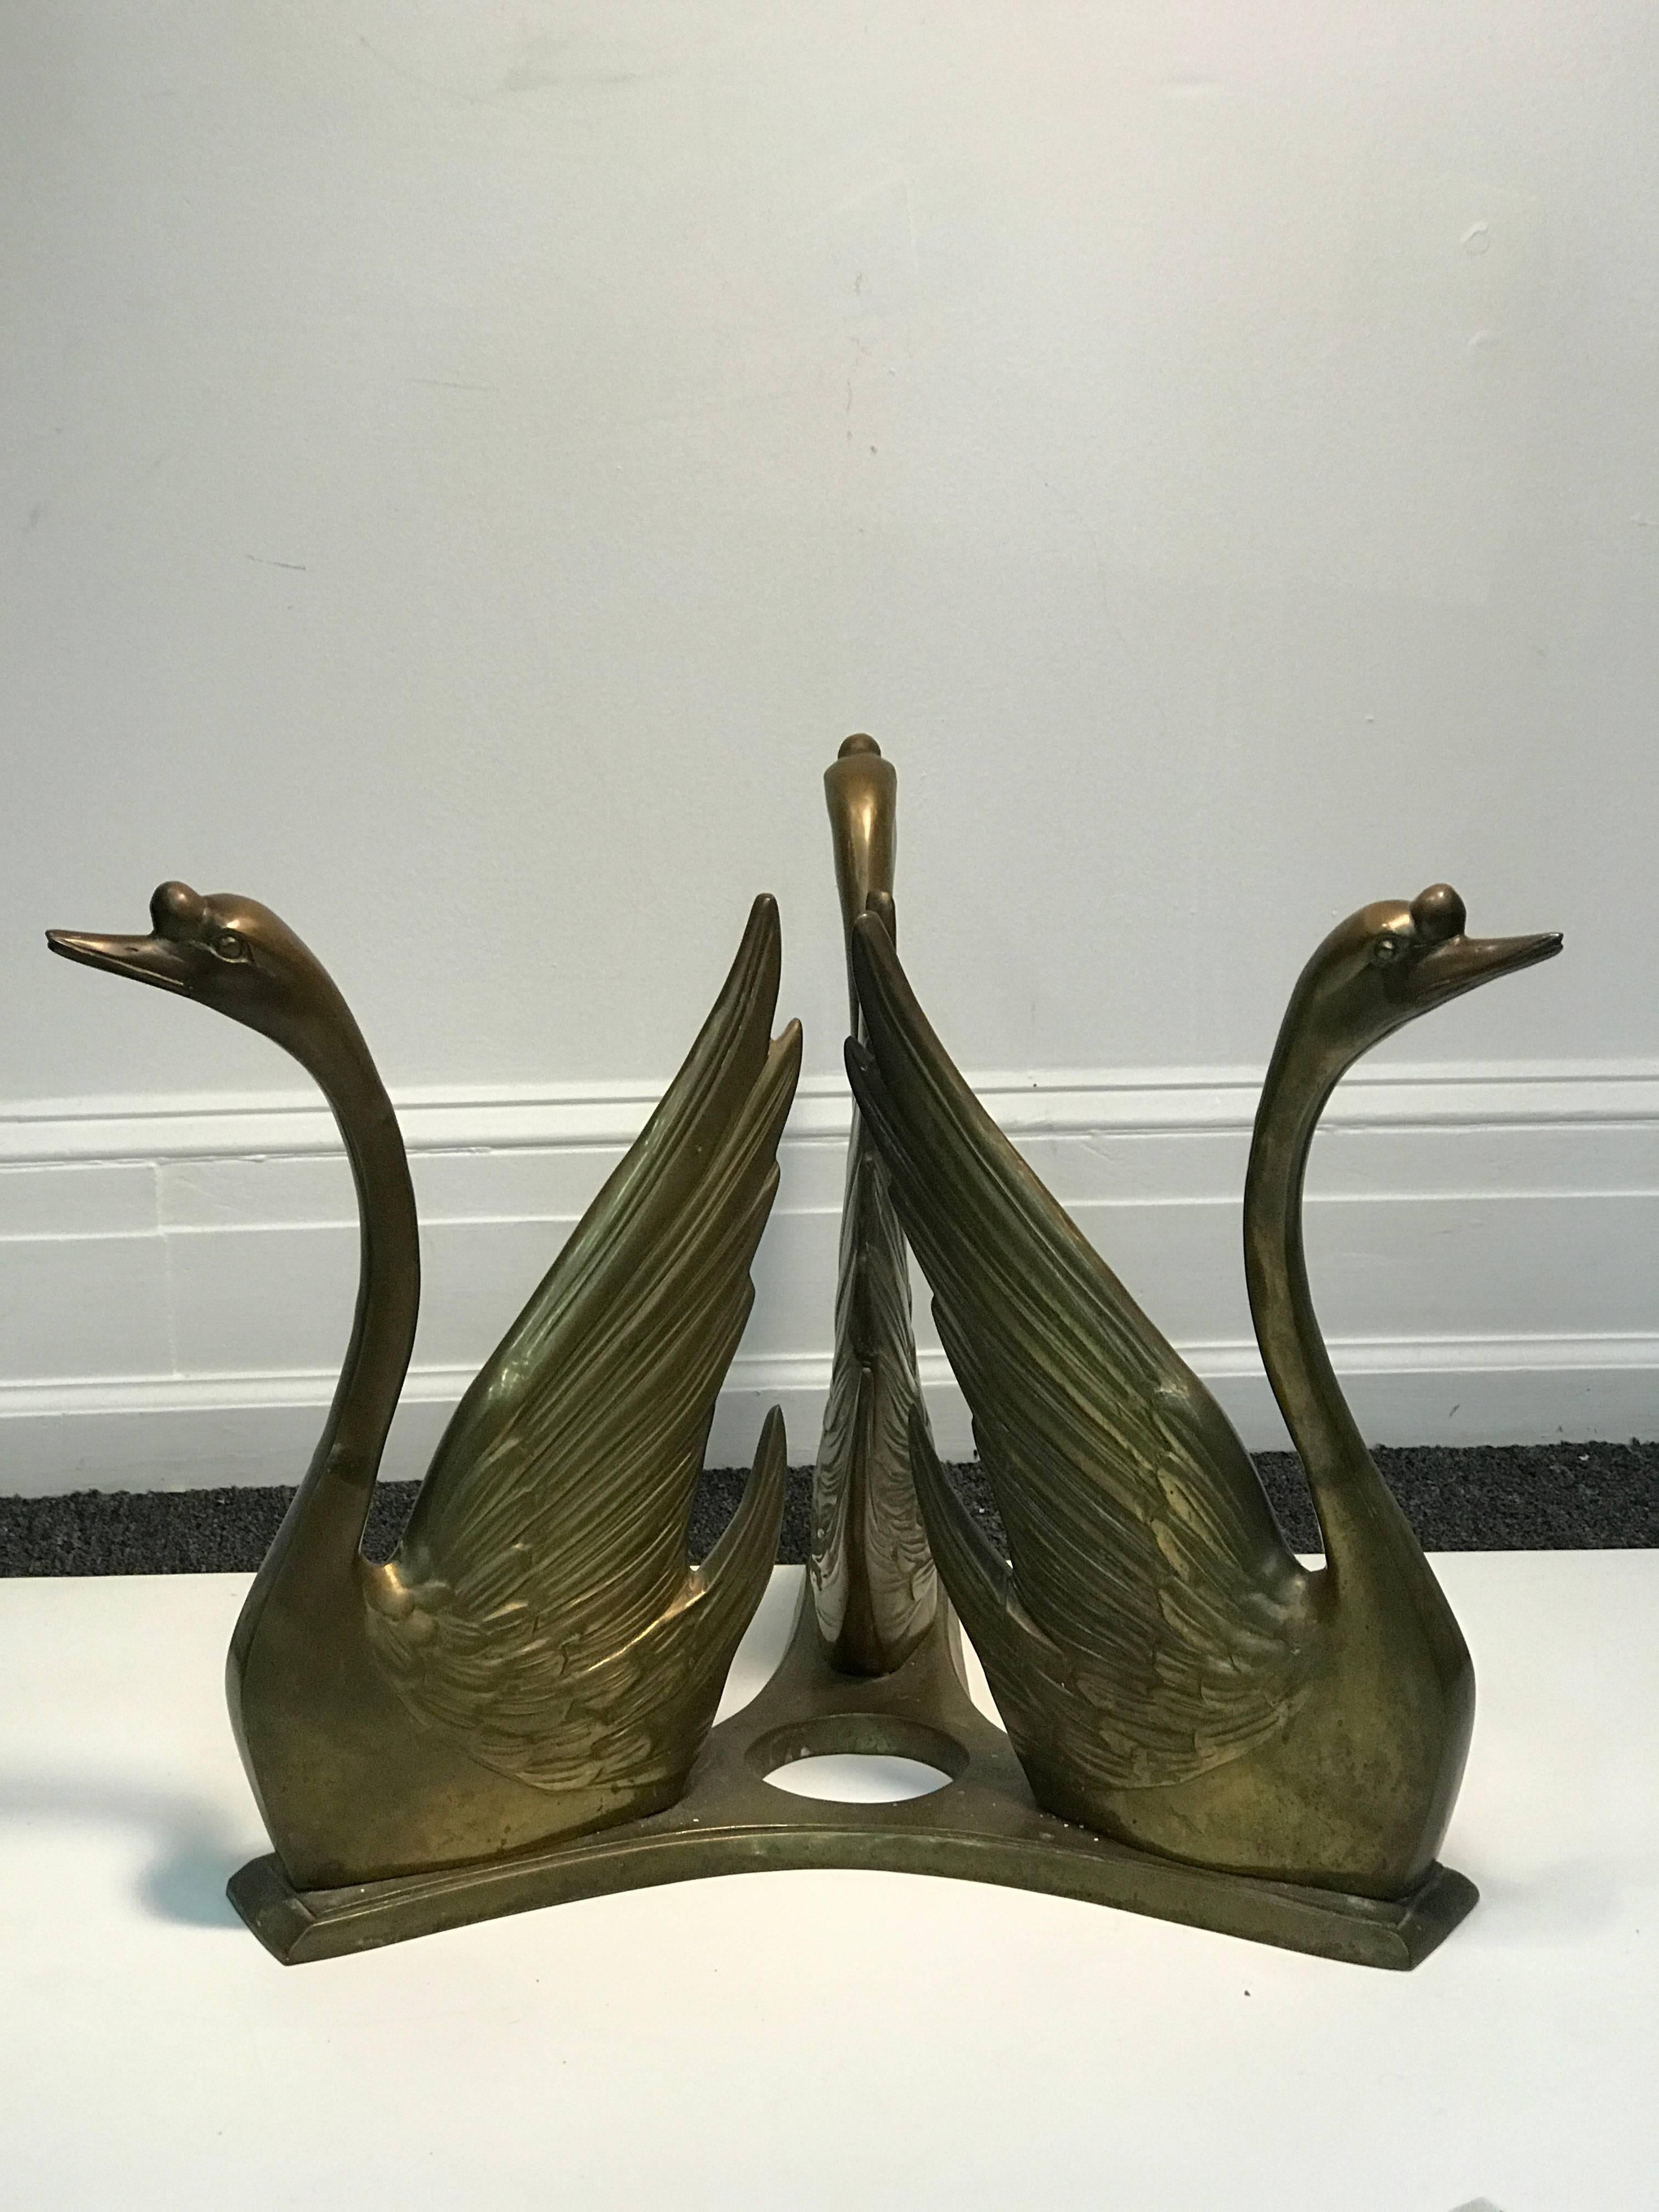 An exceptional coffee or cocktail table with base made of two beautiful, seated, sculptural brass swans in the style of Maison Jansen, circa 1970. Good vintage condition with some wear appropriate with age. The glass top measures 38